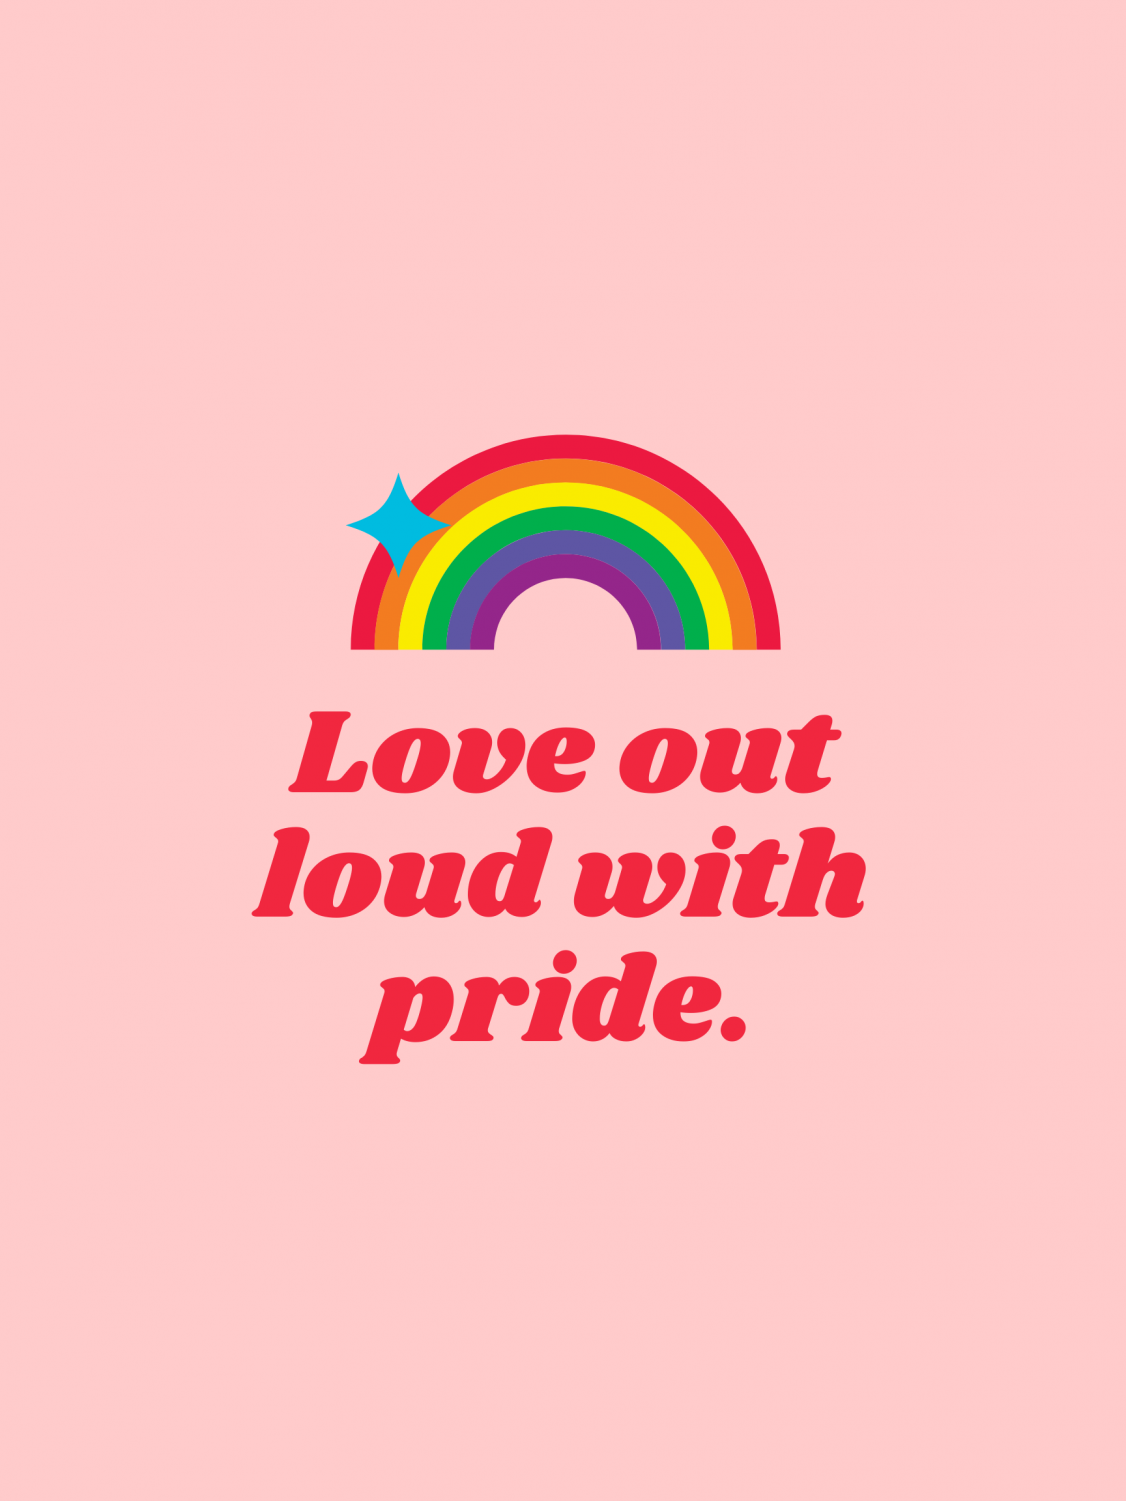 Rainbow with the words 'Love out loud with pride" underneath